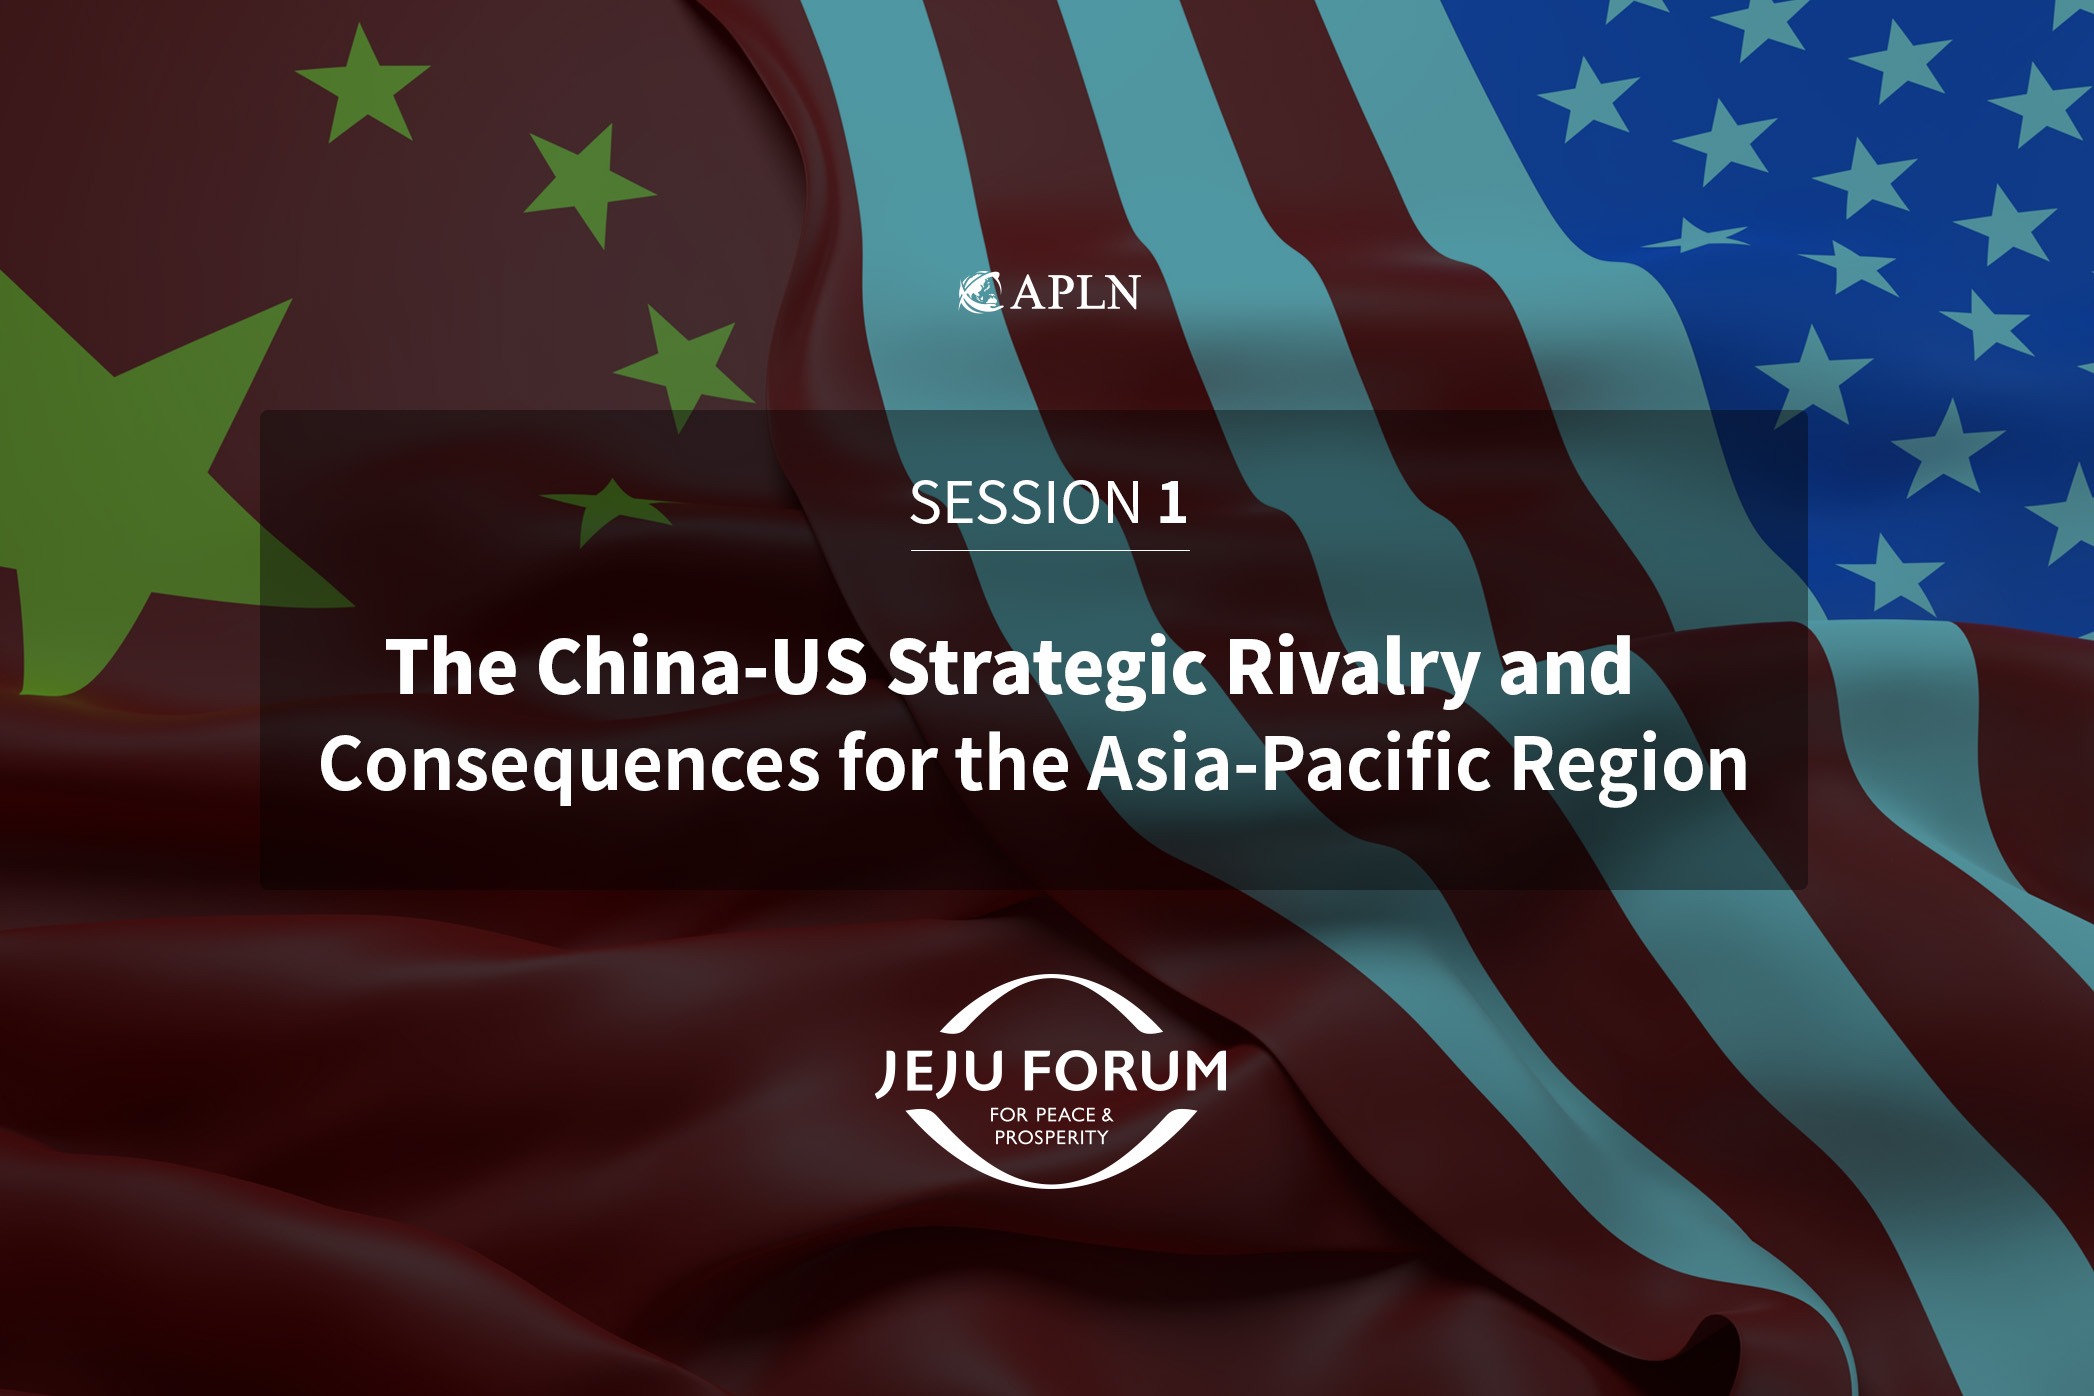 The China-US Strategic Rivalry and Consequences for the Asia Pacific Region